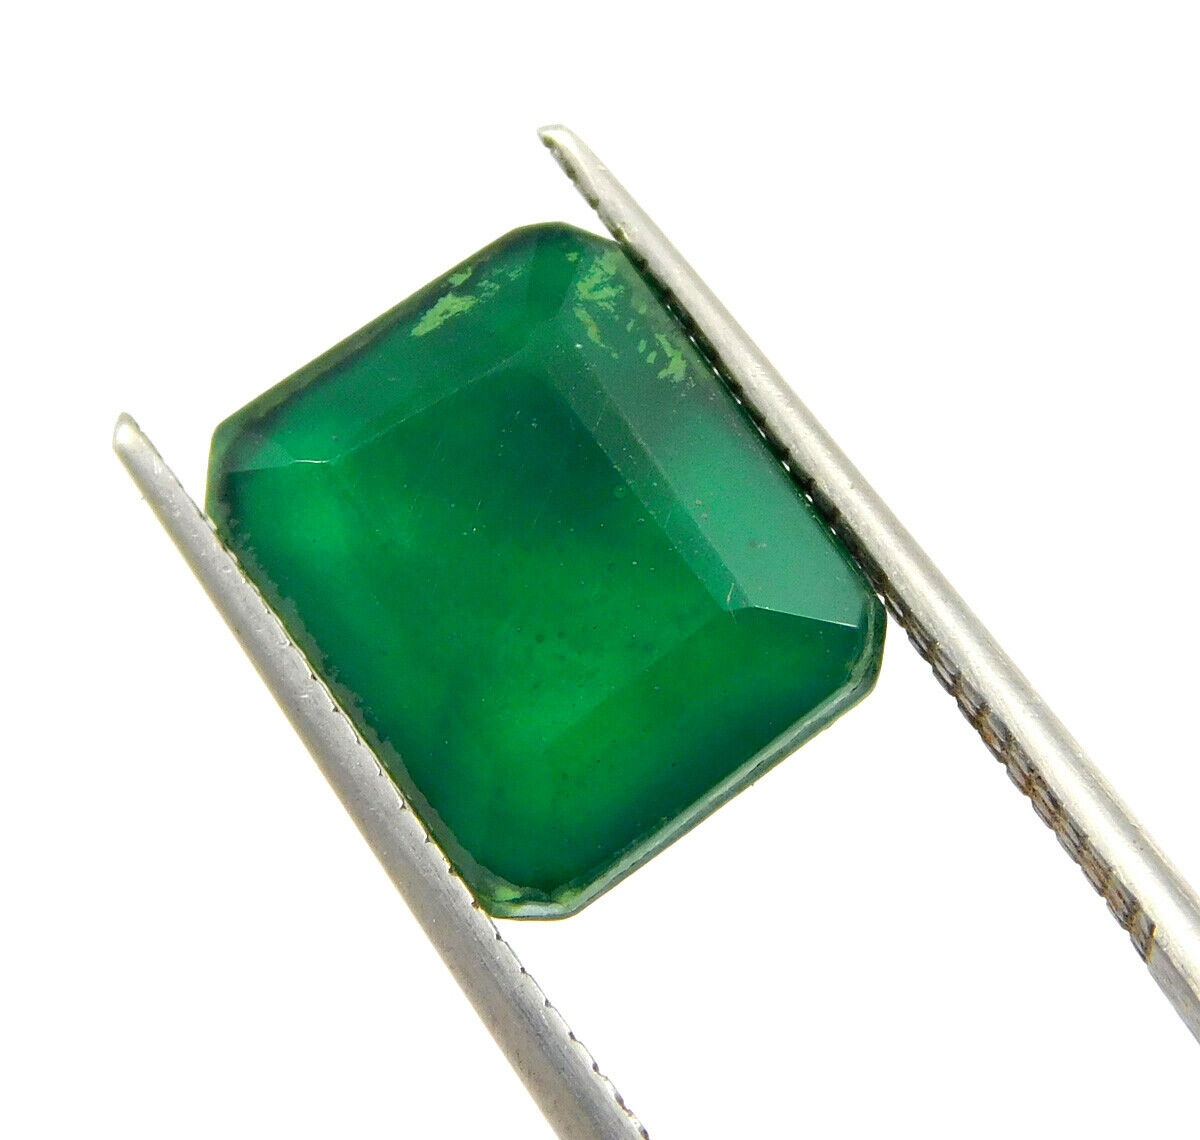 5.48 Cts. Faceted Green Emerald Simulant Loose Gemstone Rm18853